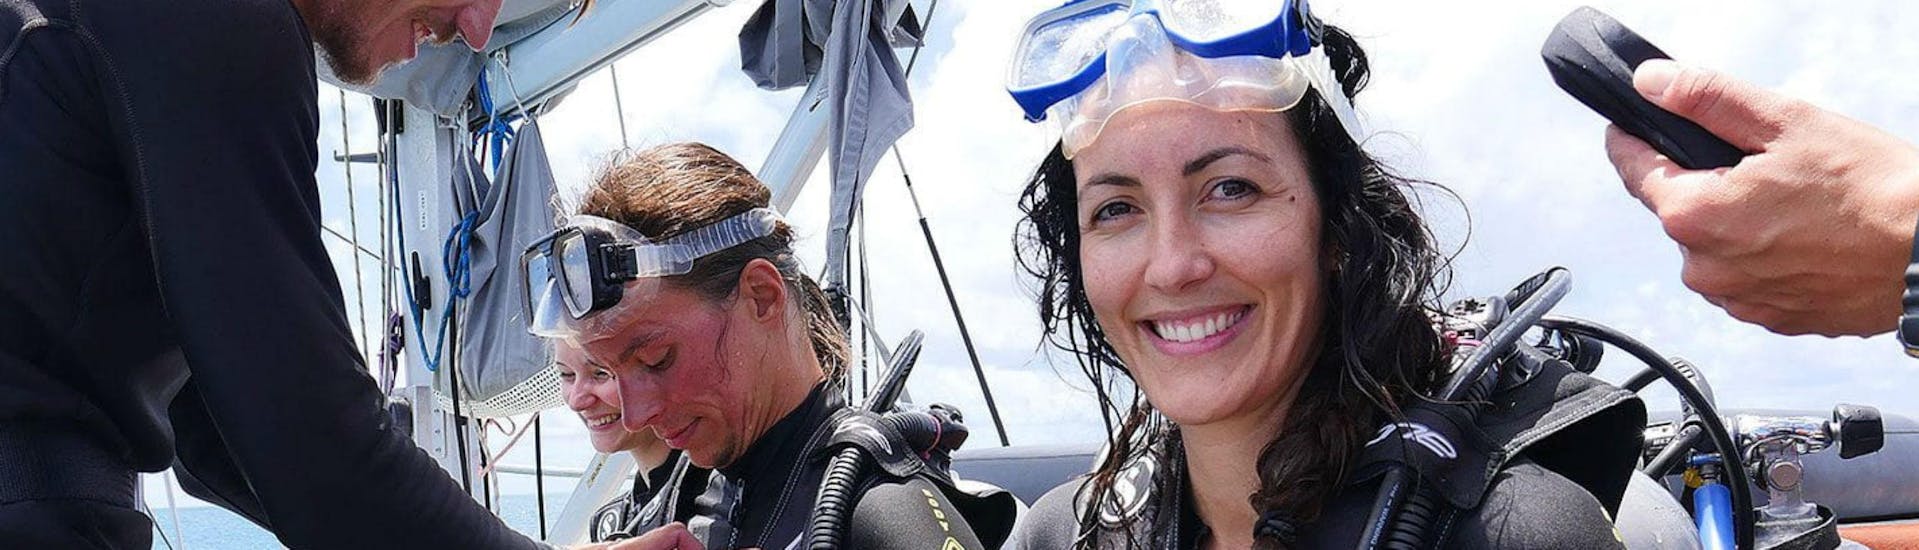 A group of scuba divers is preparing to get into the water for some Beginners' Scuba Diving at the Great Barrier Reef with Ocean Free.